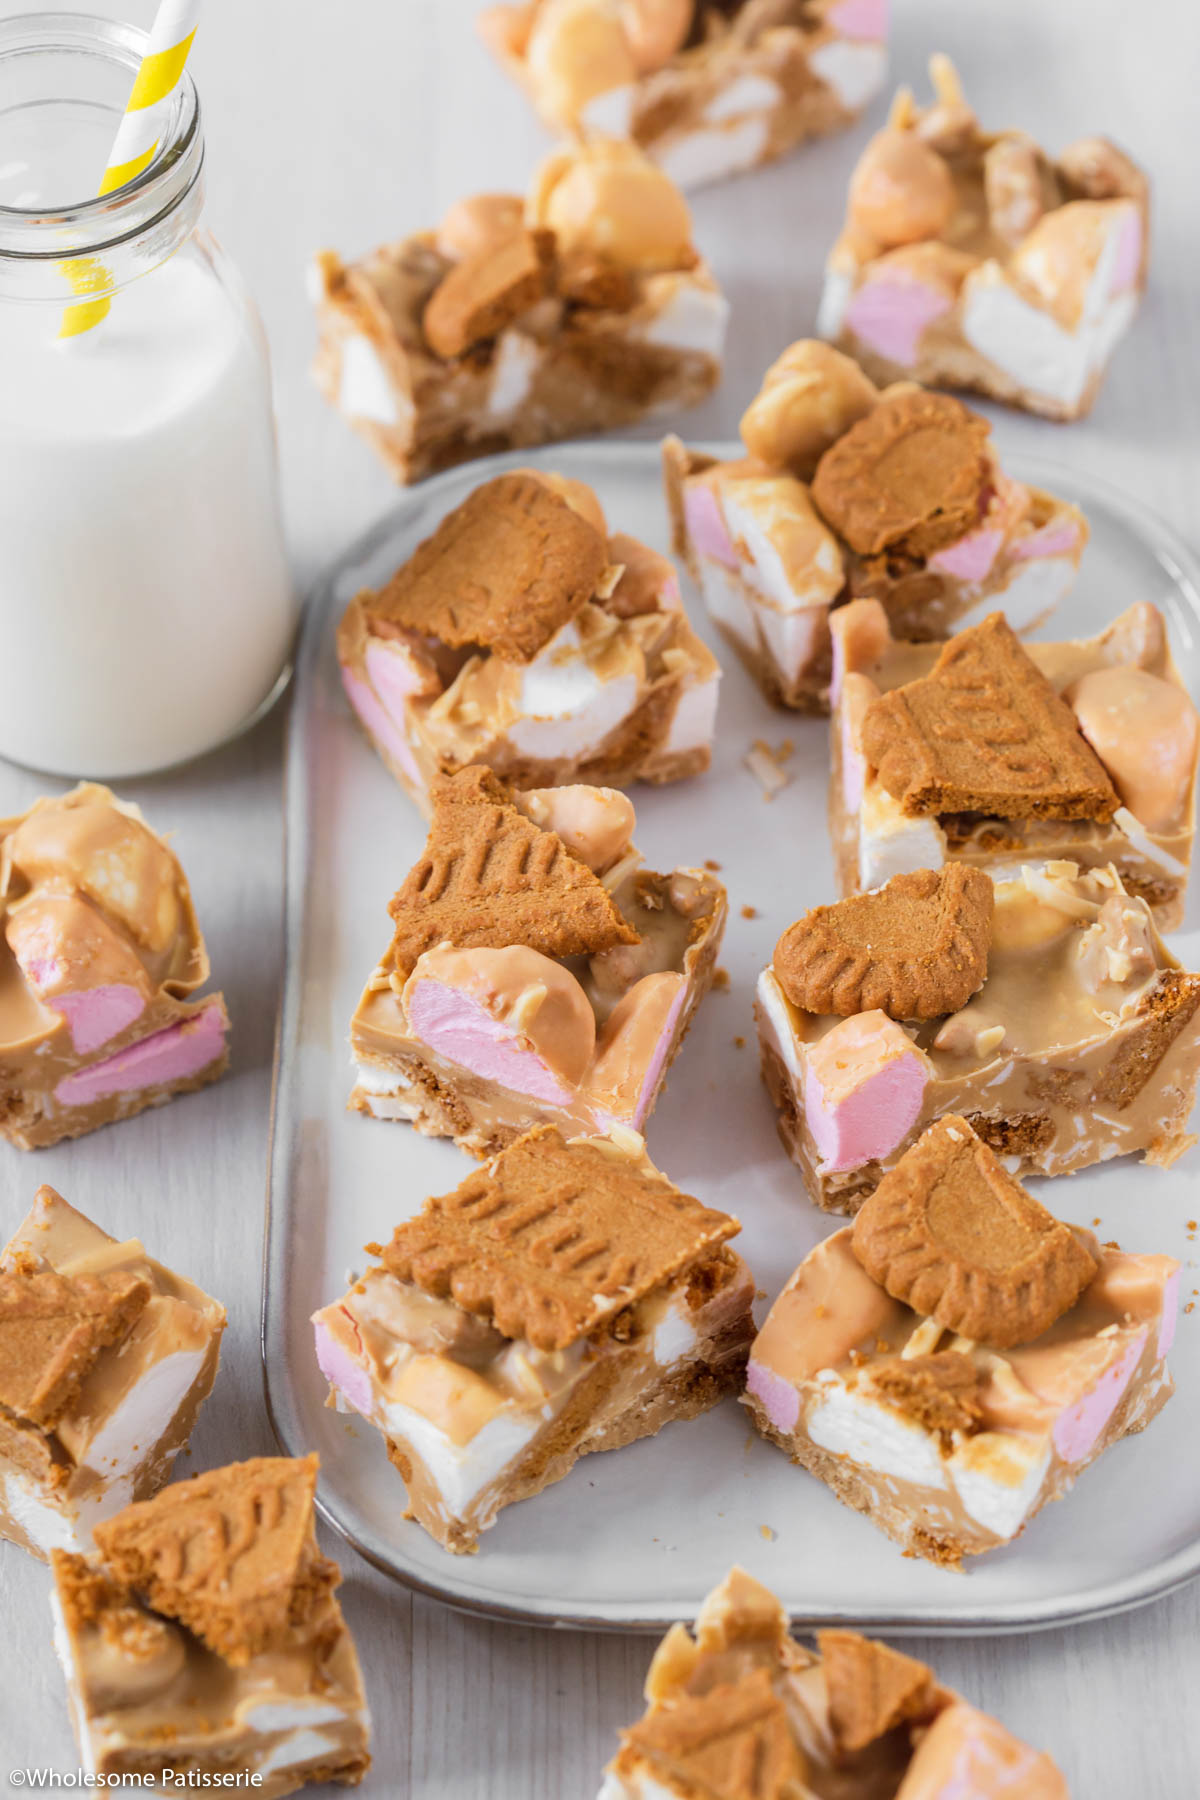 Biscoff rocky road cut into squares all sitting on a serving platter next to glass of milk.